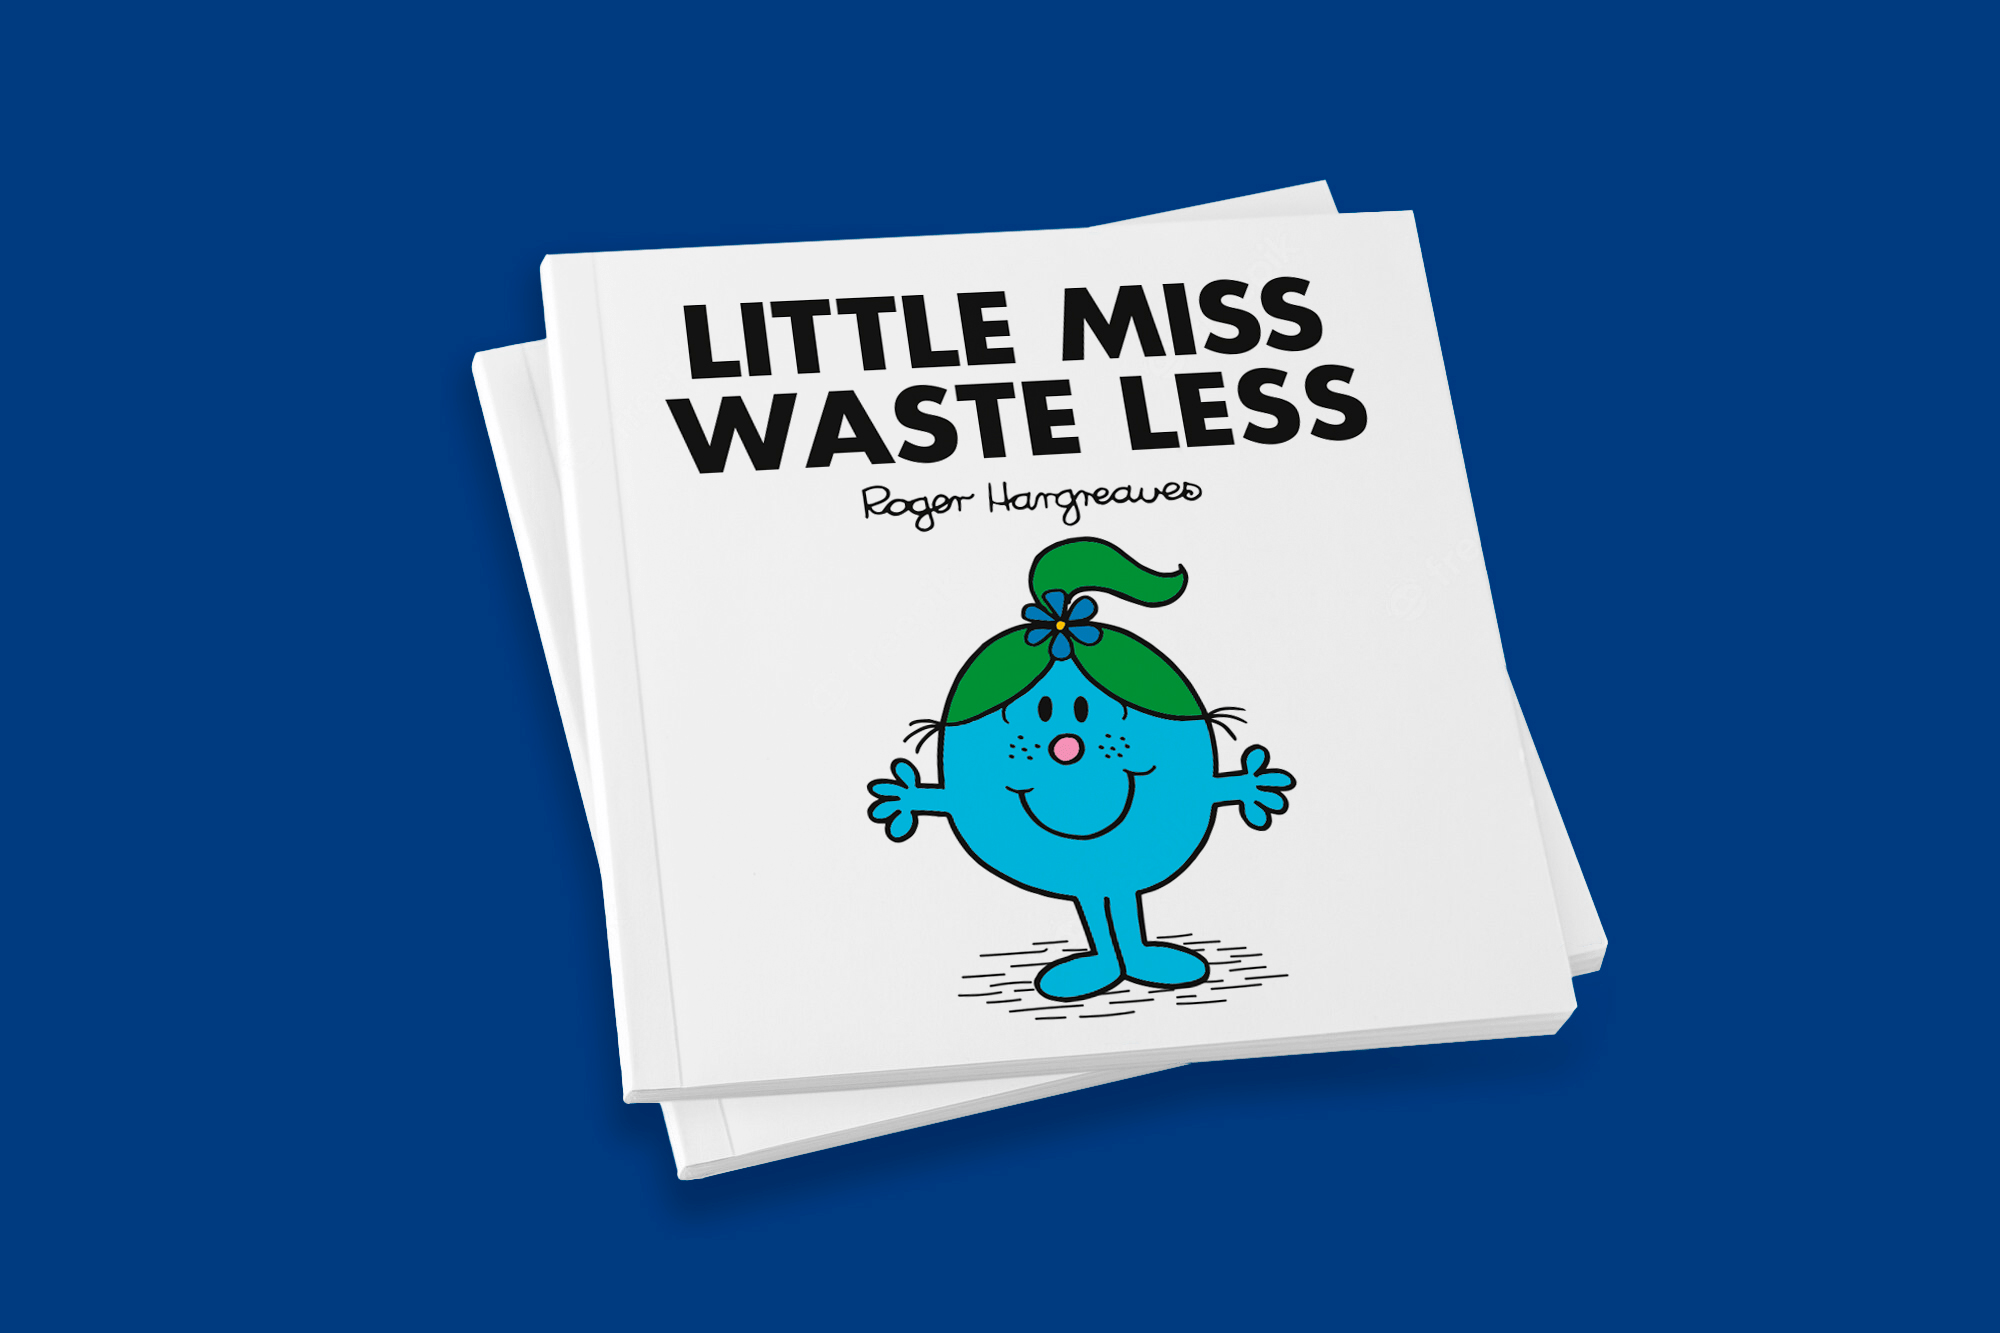 New Little Miss character created to encourage people to produce less waste